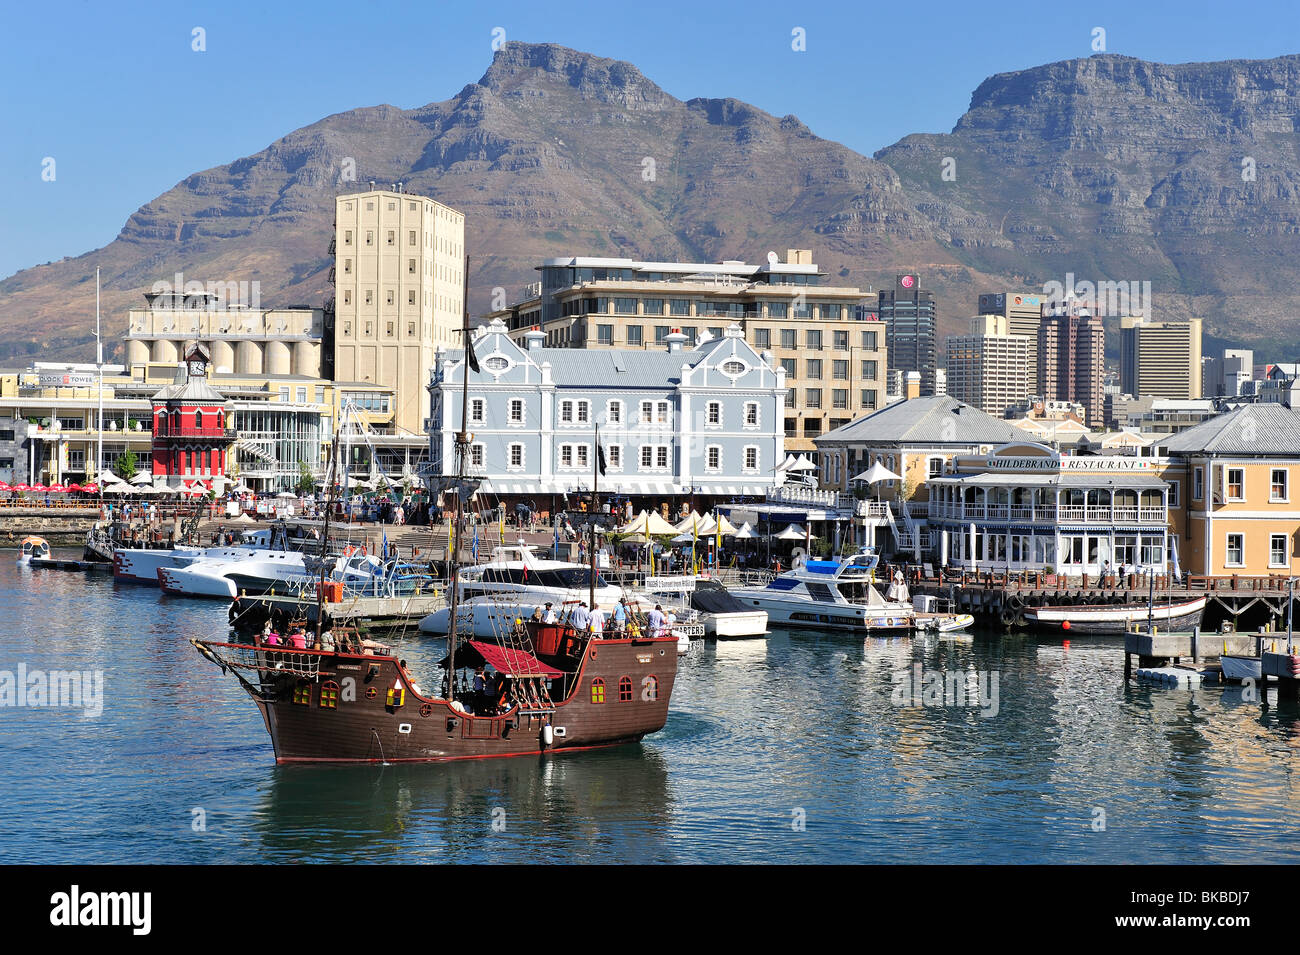 Pleasures and plans at the V&A Waterfront